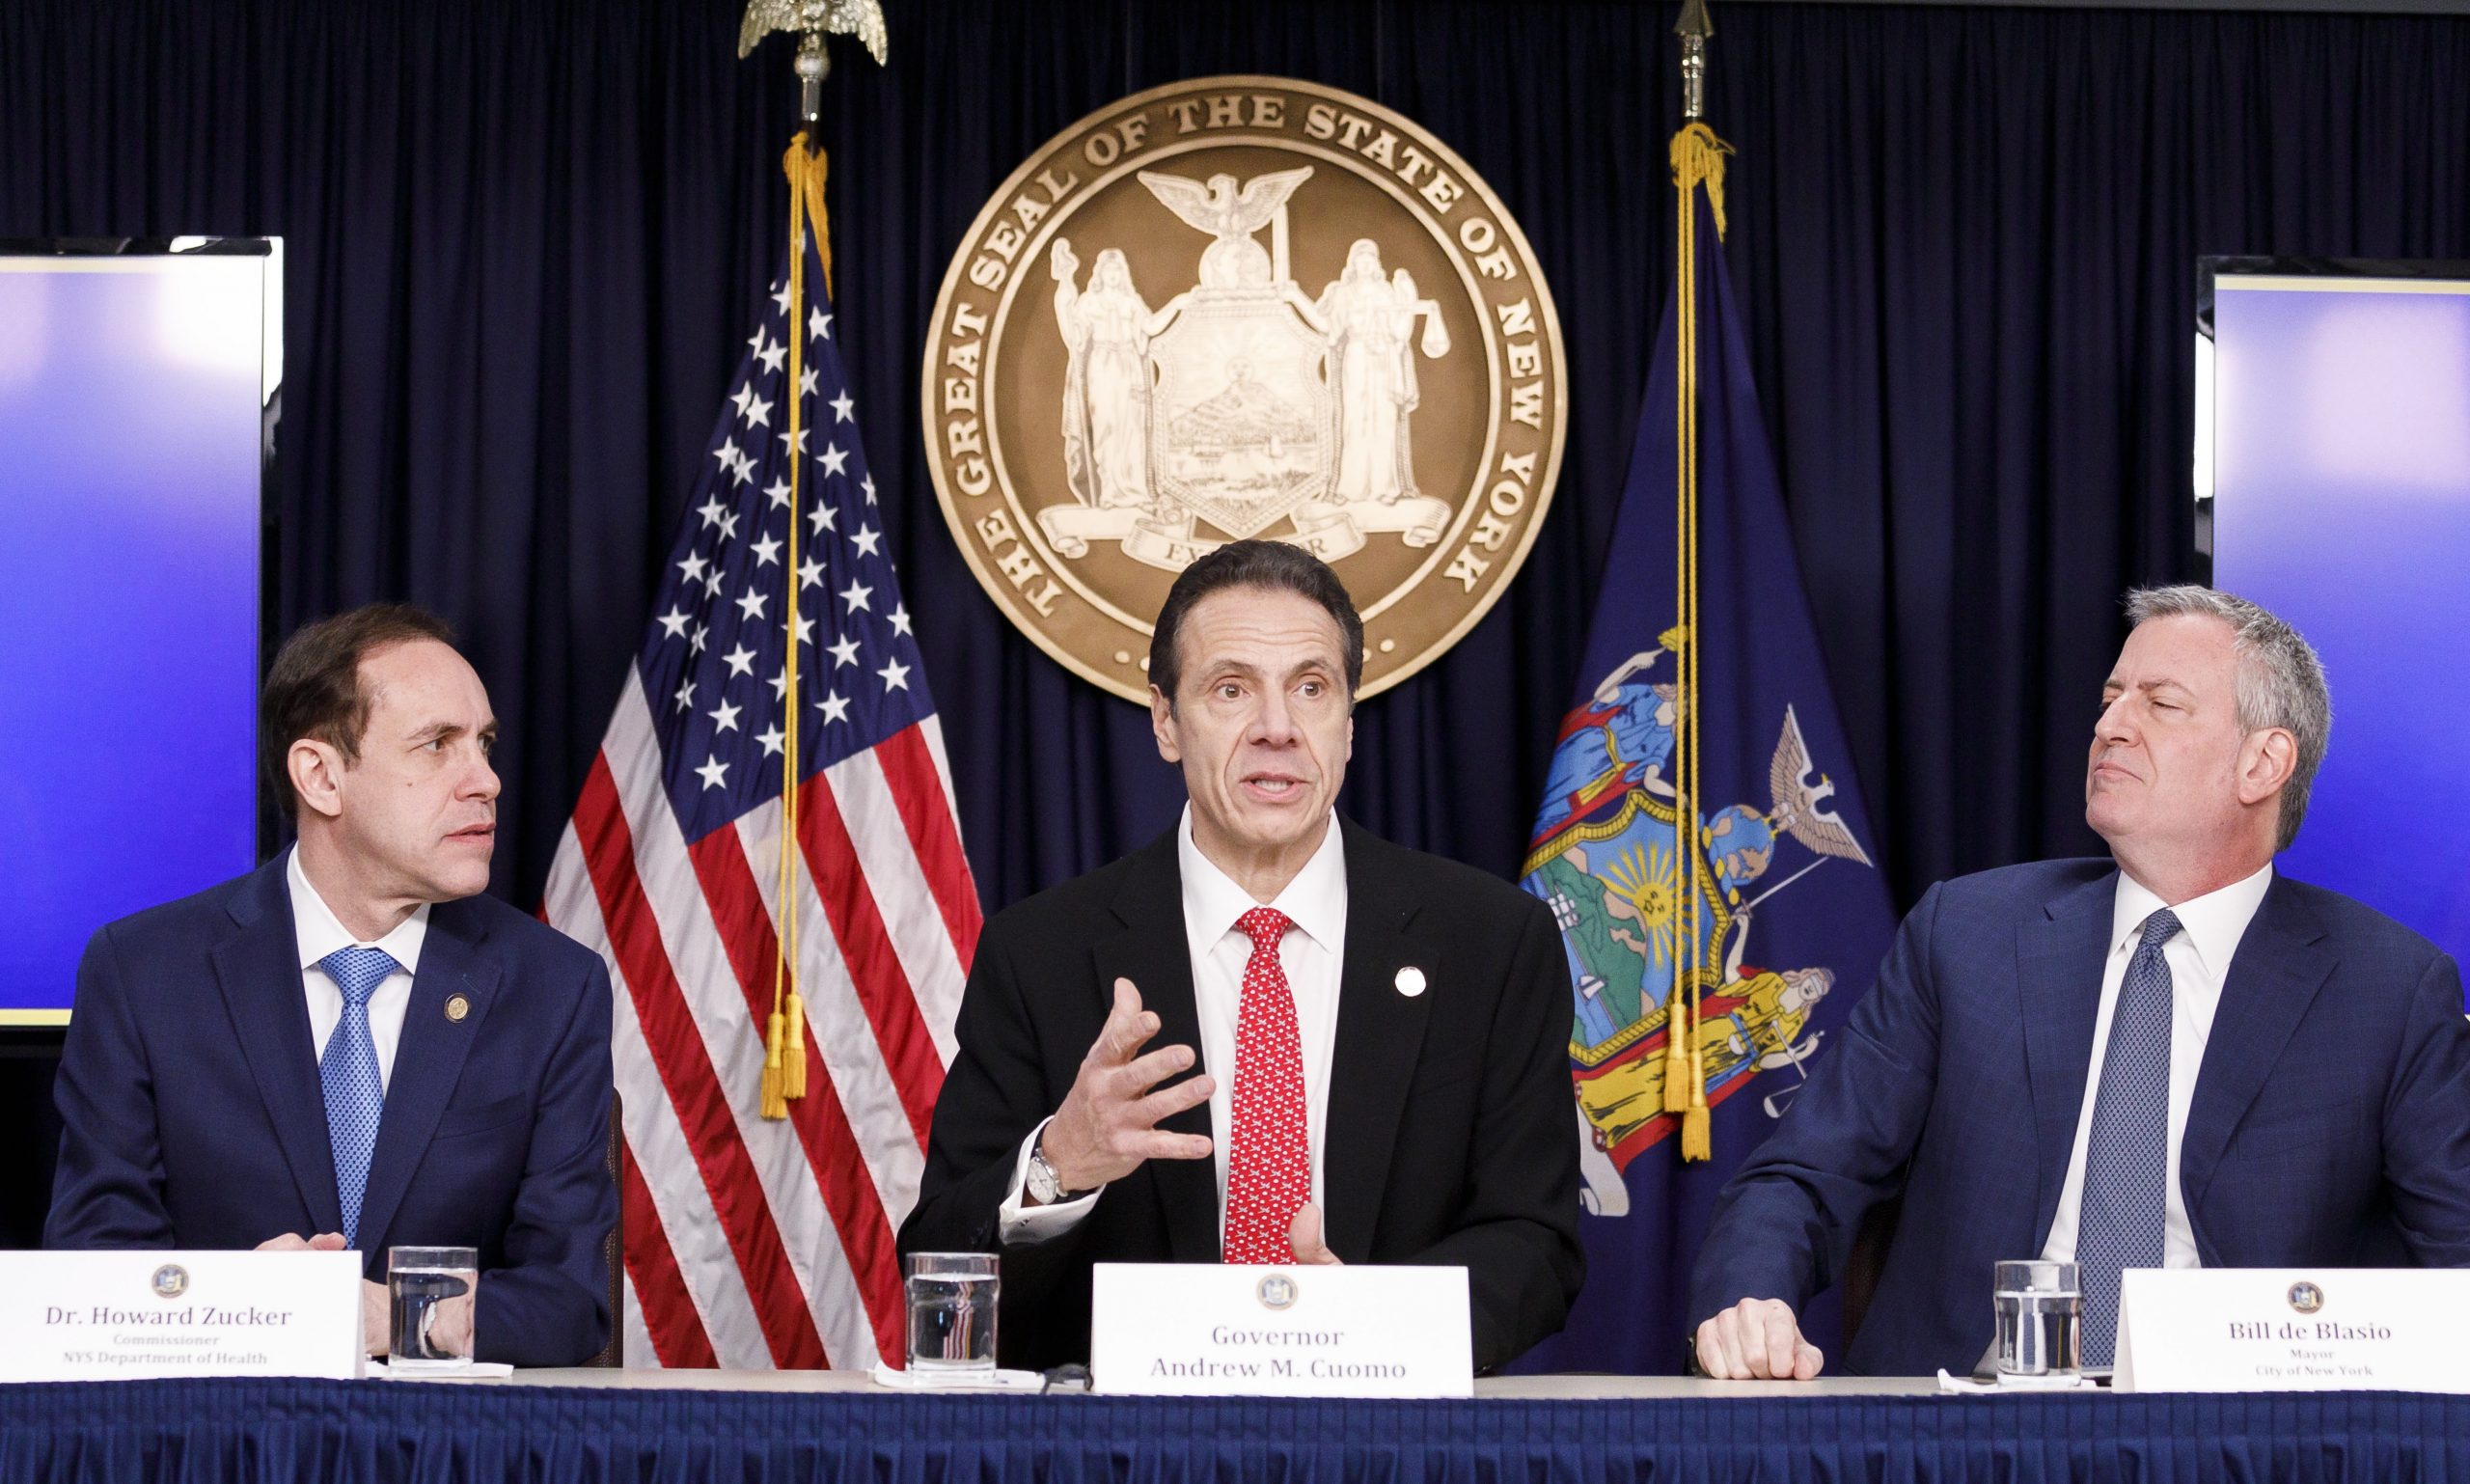 epa08265003 New York Governor Andrew Cuomo (C) speaks as New York City Mayor Bill de Blasio (R) and New York States’ Health Department Commissioner Dr. Howard Zucker (L) listen during a press conference about the city’s first known case of the coronavirus in New York, New York, USA, on 02 March 2020. The patient who tested positive for the virus is a healthcare worker who had recently travelled to Iran.  EPA/JUSTIN LANE